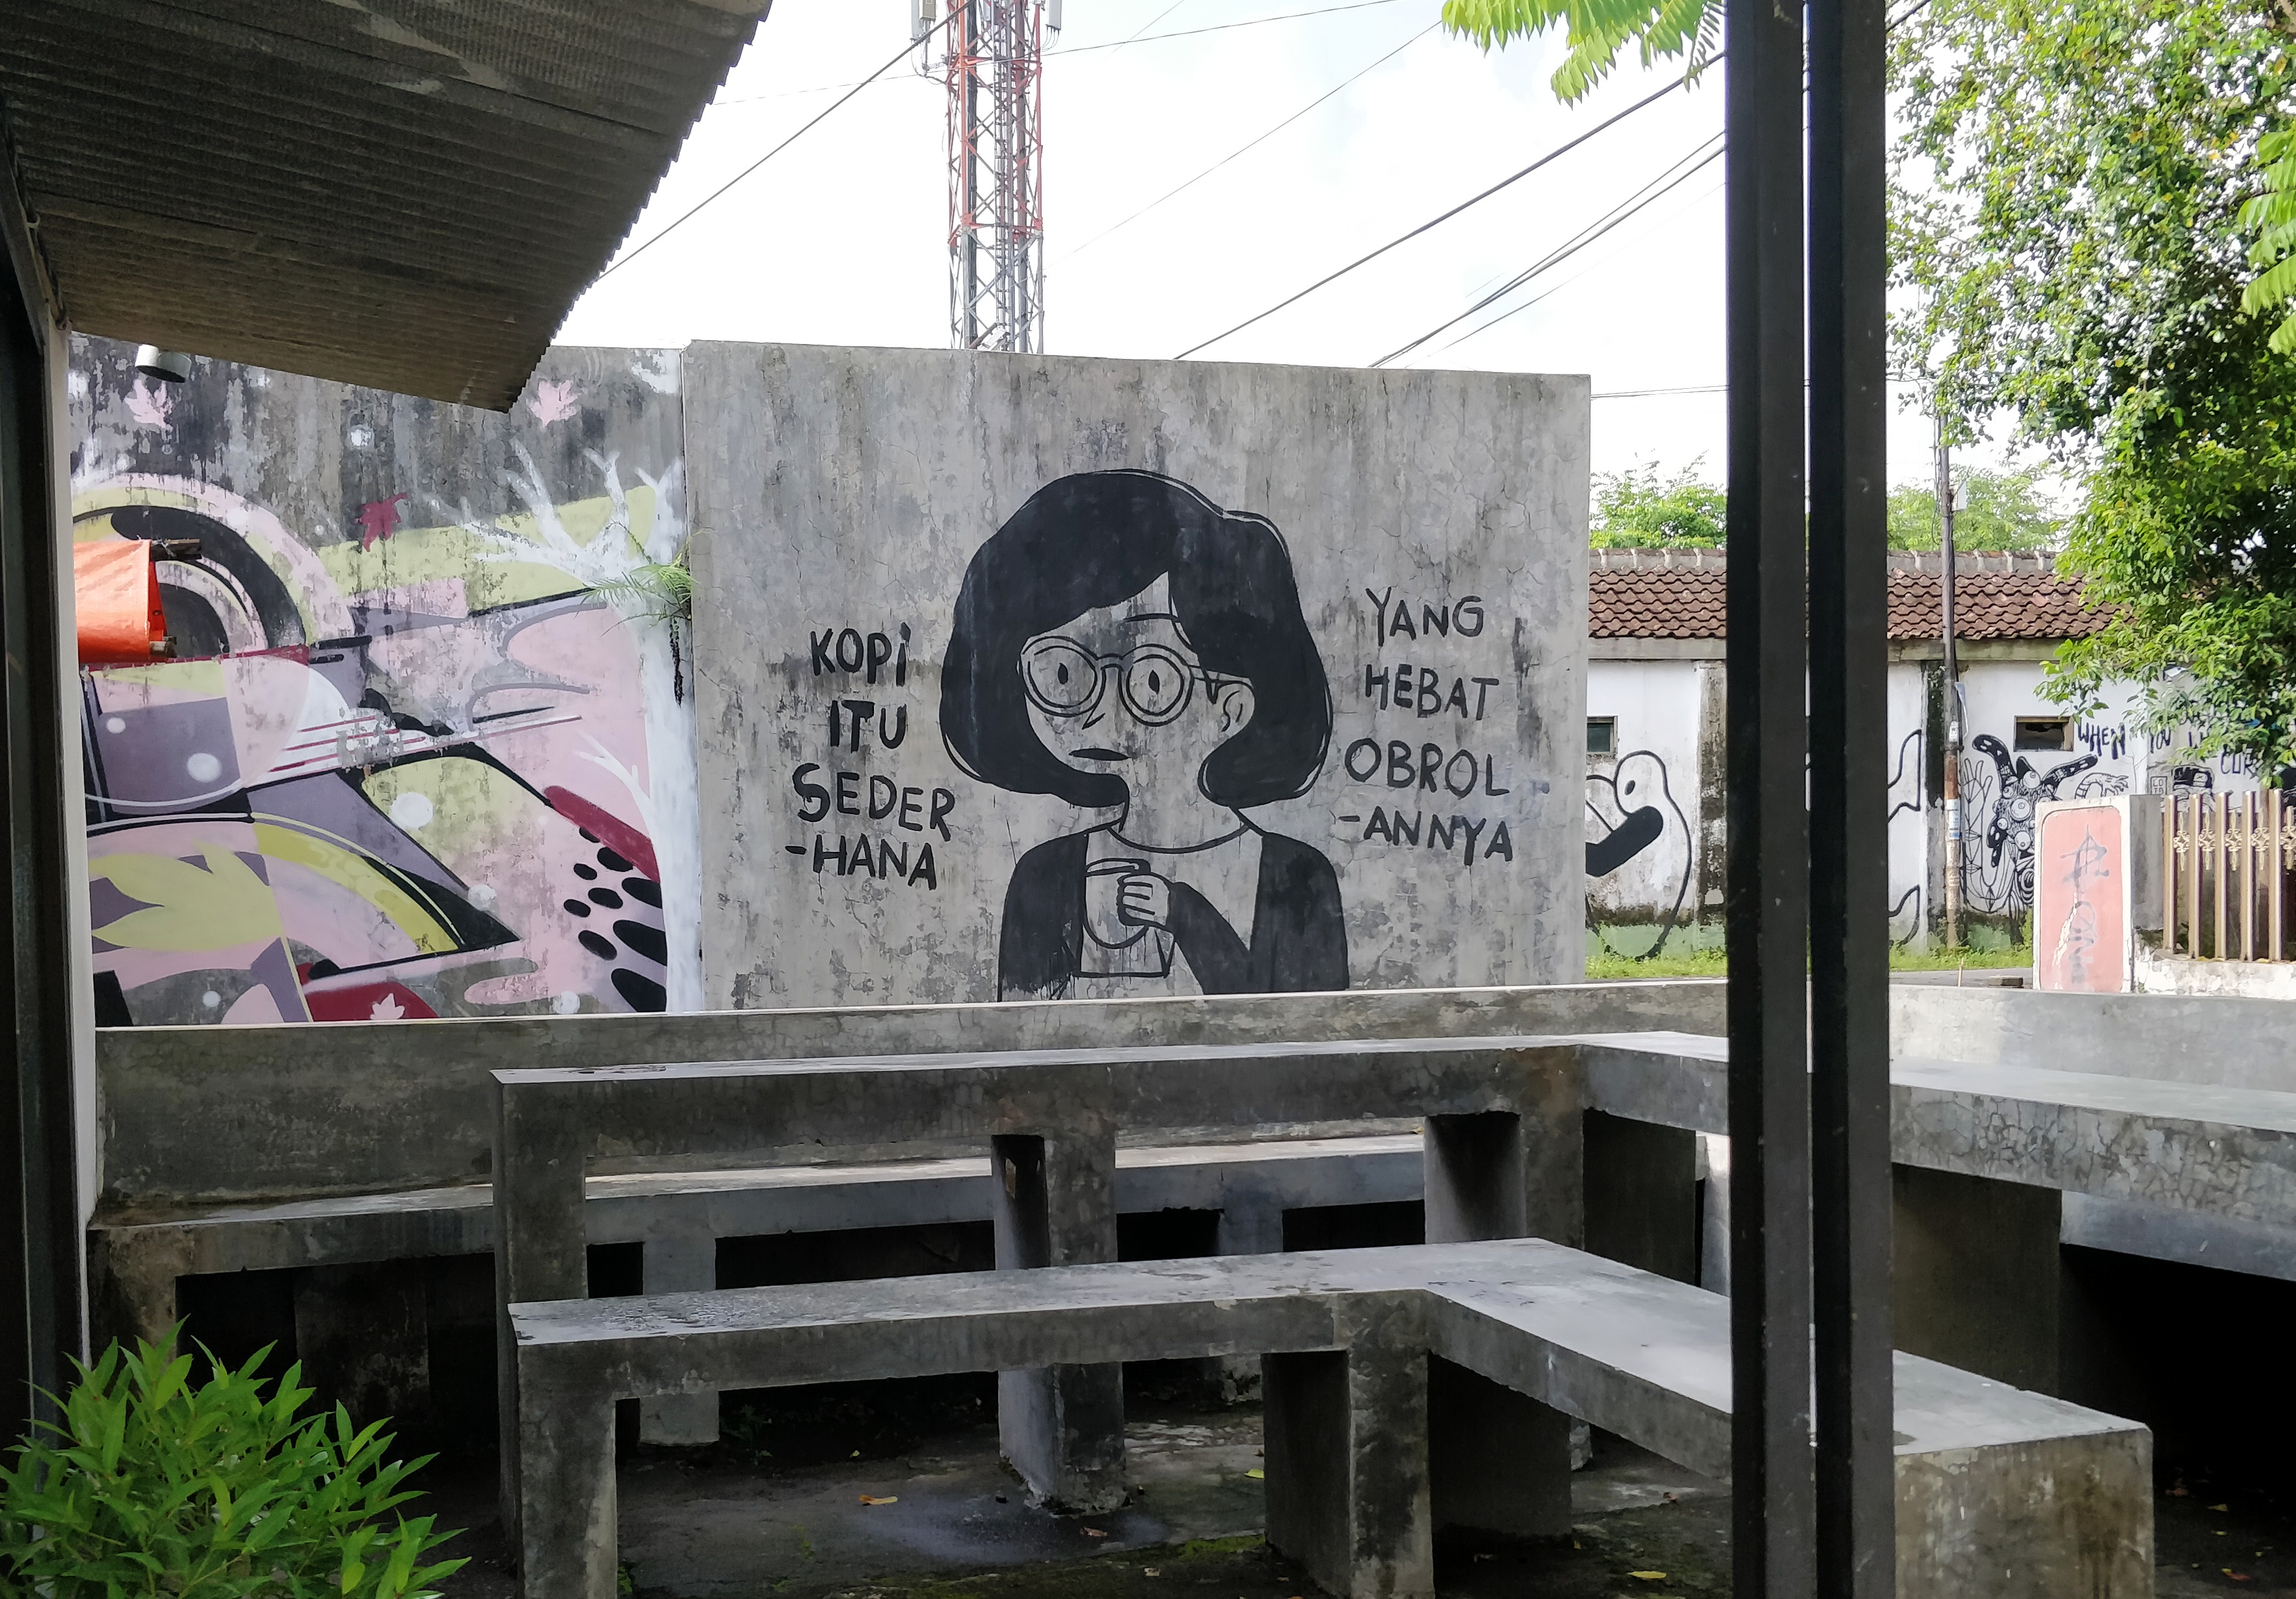 Coffee and conversation street art in northern Yogyakarta. Photo by author.